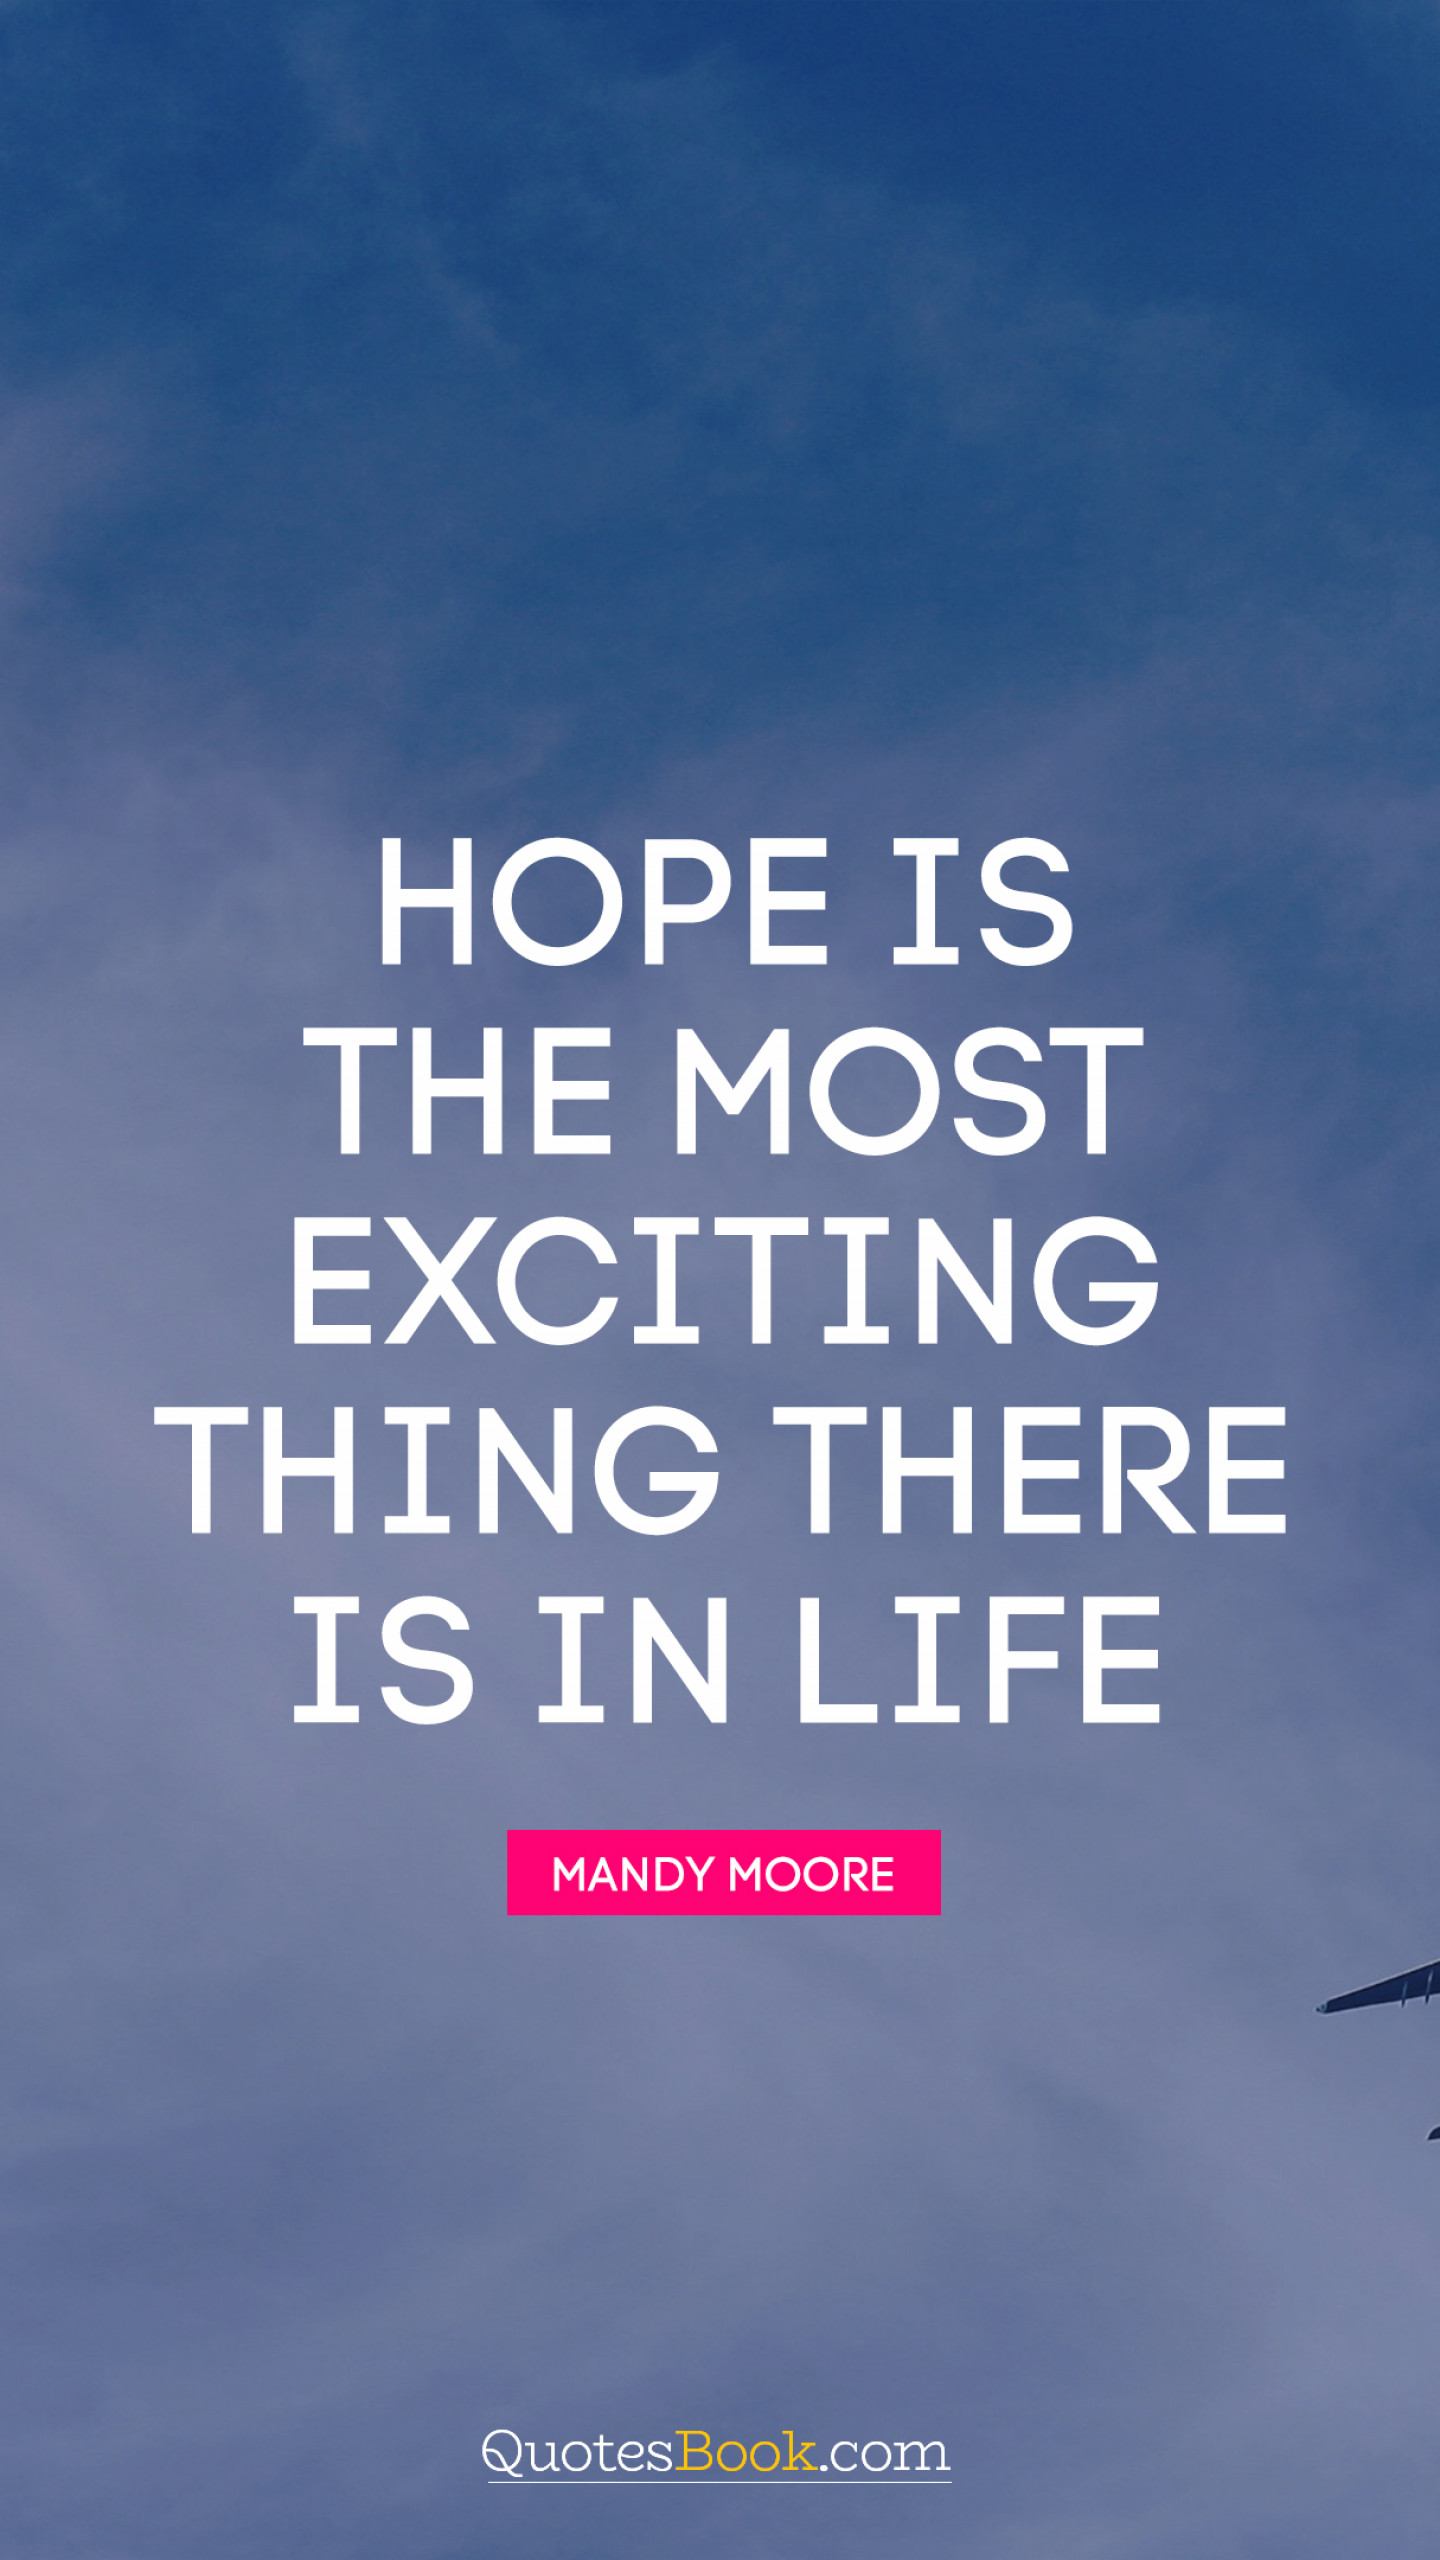 mandy moore hope is the most exciting thing there is in life 504 page=4